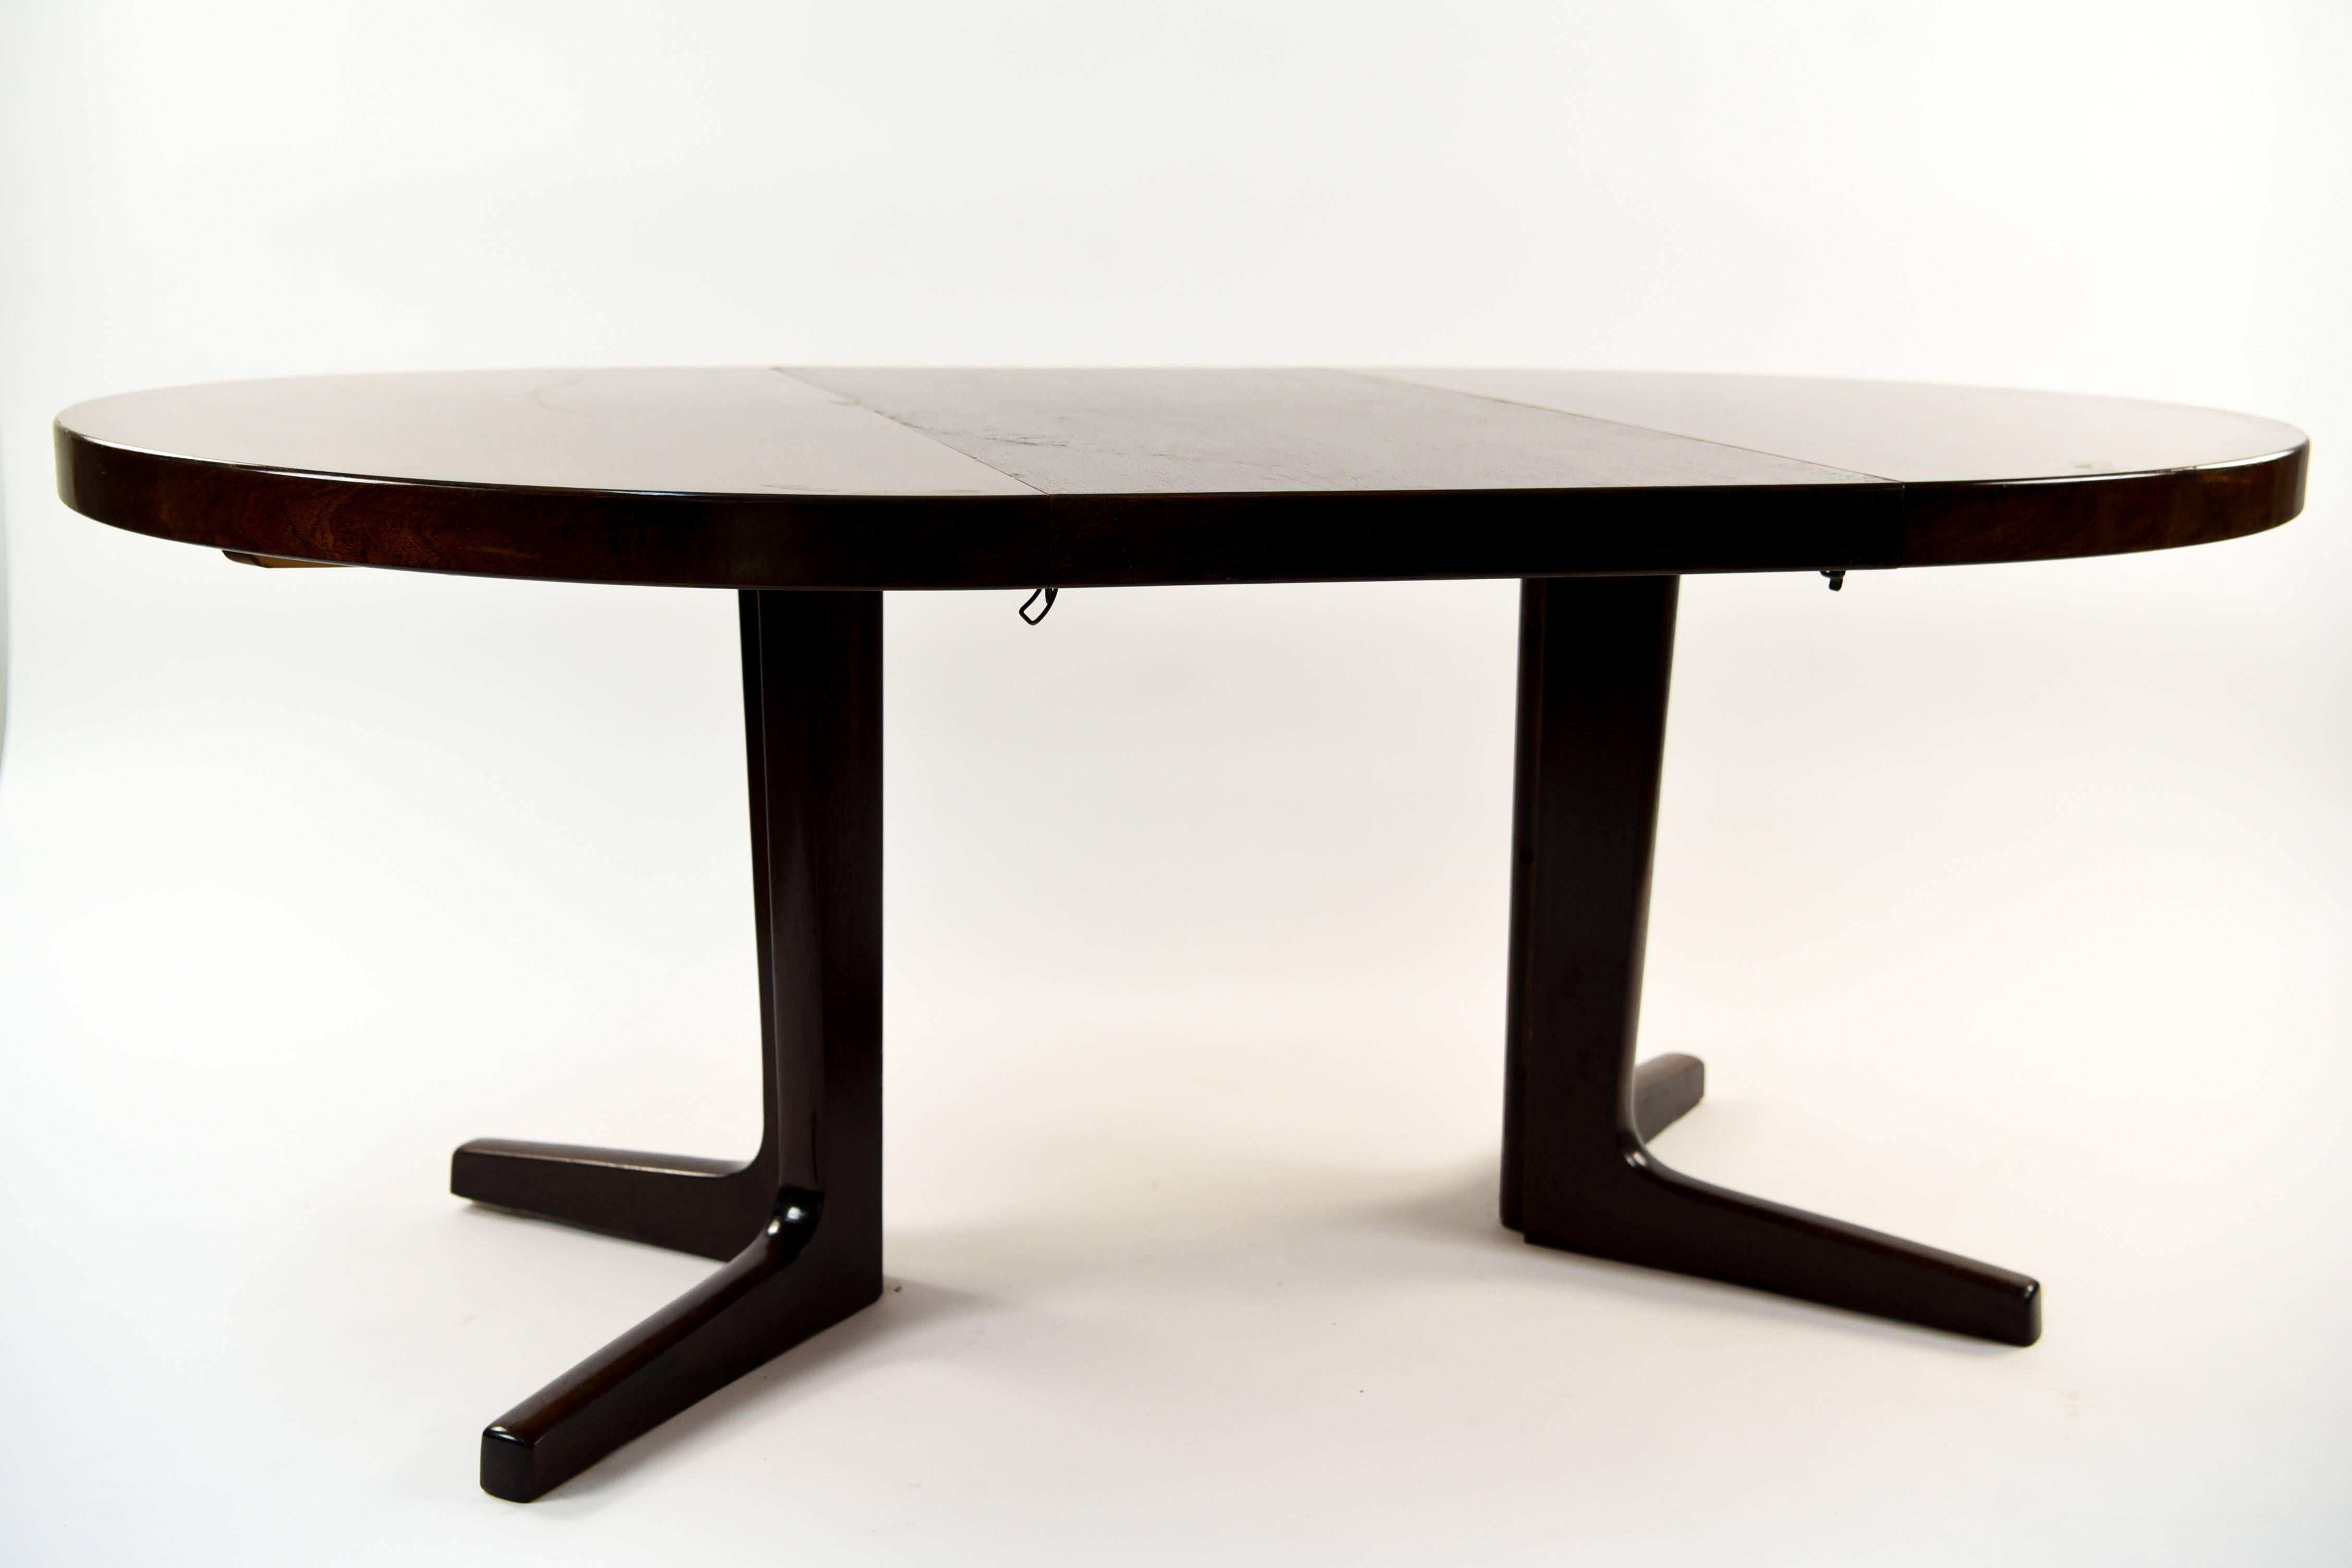 This dining table is by iconic Danish midcentury designer Kai Kristiansen. It includes one leaf which expands the table to 67.25